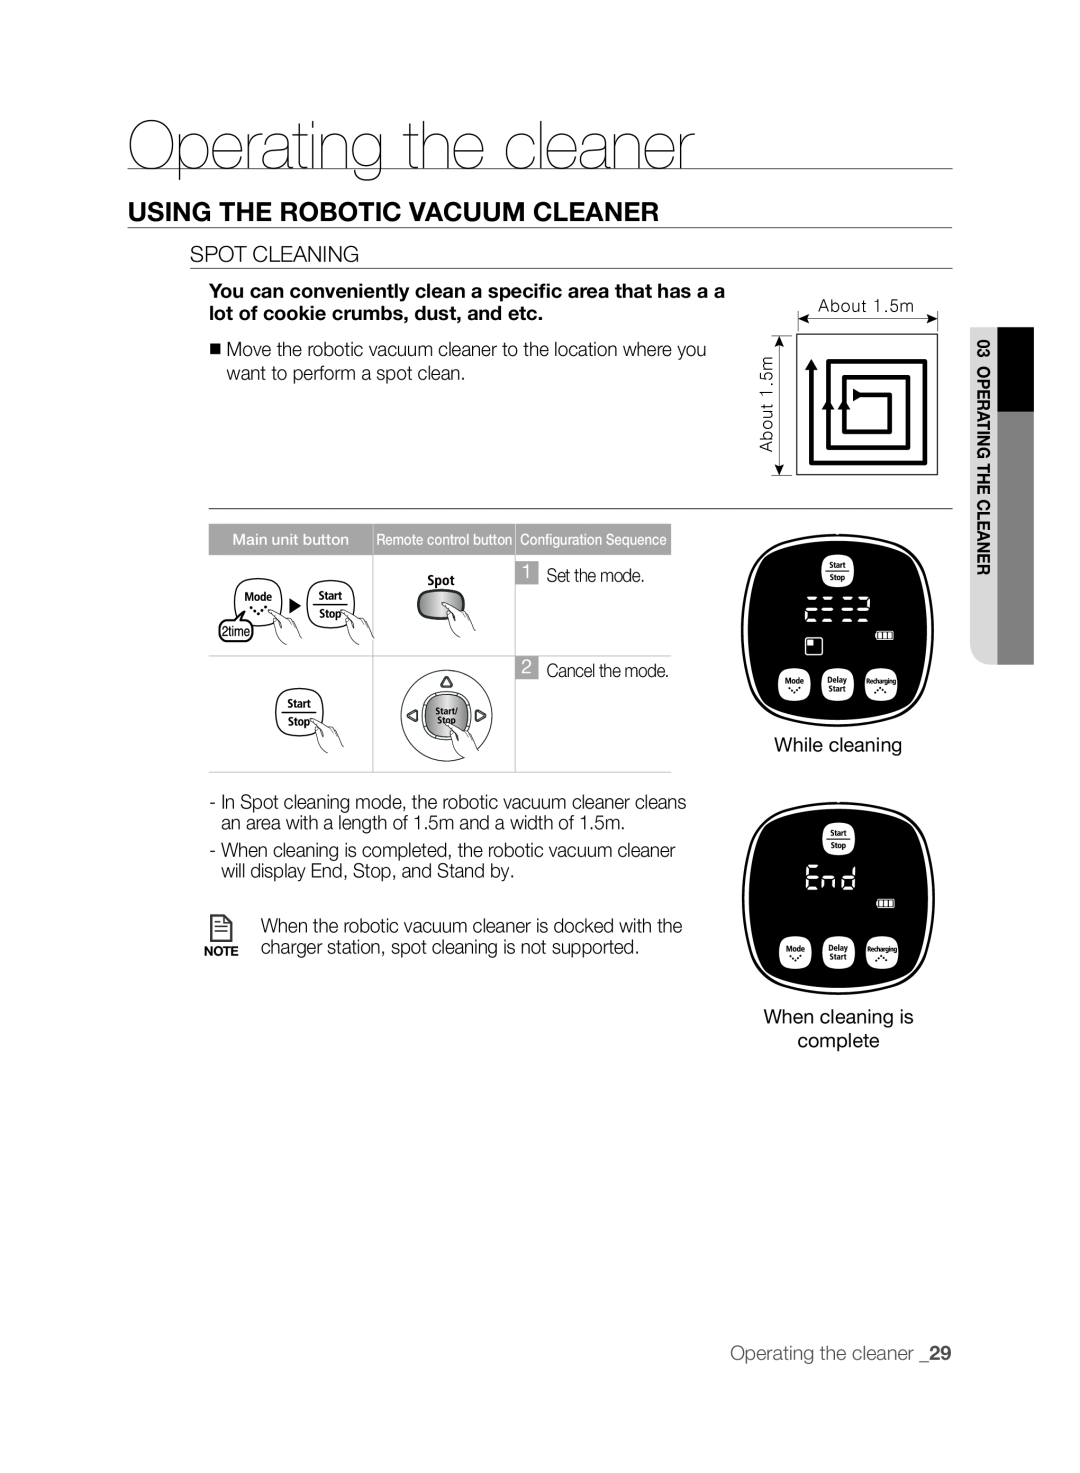 Samsung DJ68-00518A, VCR8830T1R, SR8830 Using the robotic vacuum cleaner, Spot Cleaning, Operating the cleaner _29 